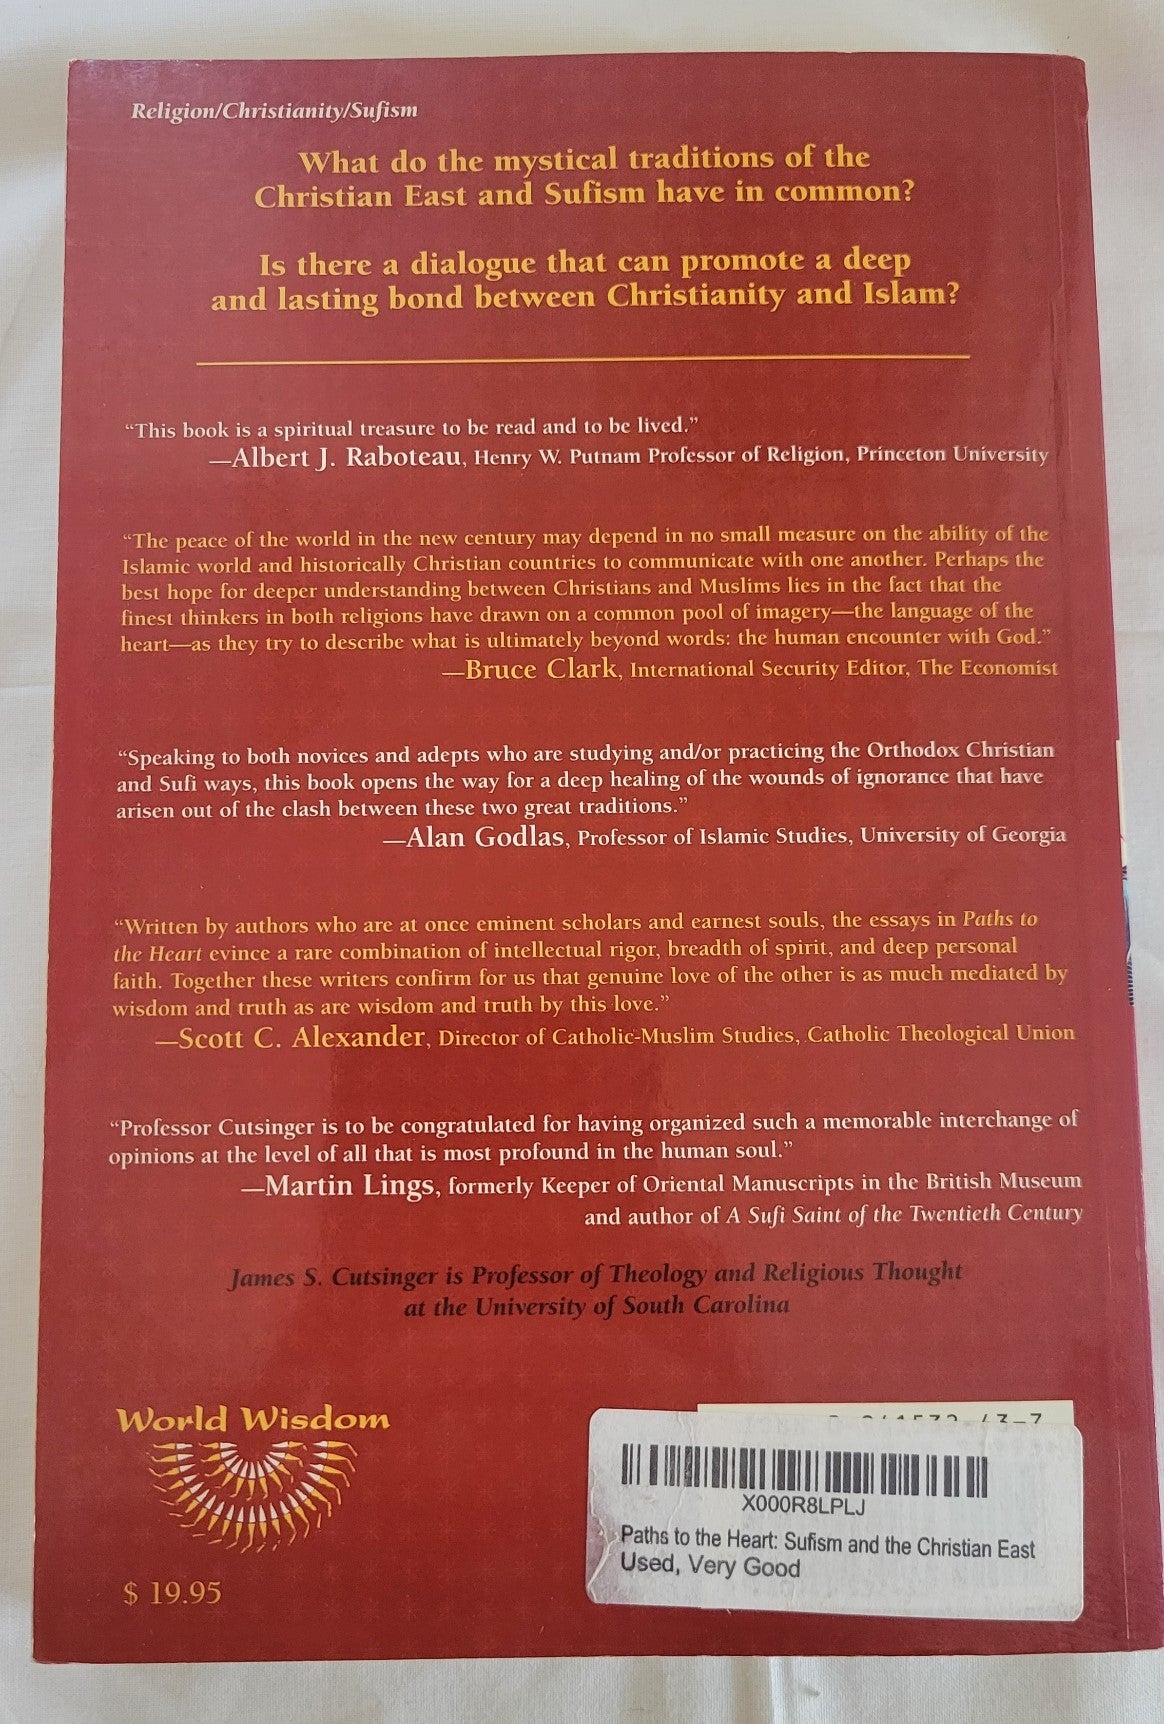 Used book for sale, " Paths to the Heart: Sufism and the Christian East” edited by James S. Cutsinger. View of back cover.